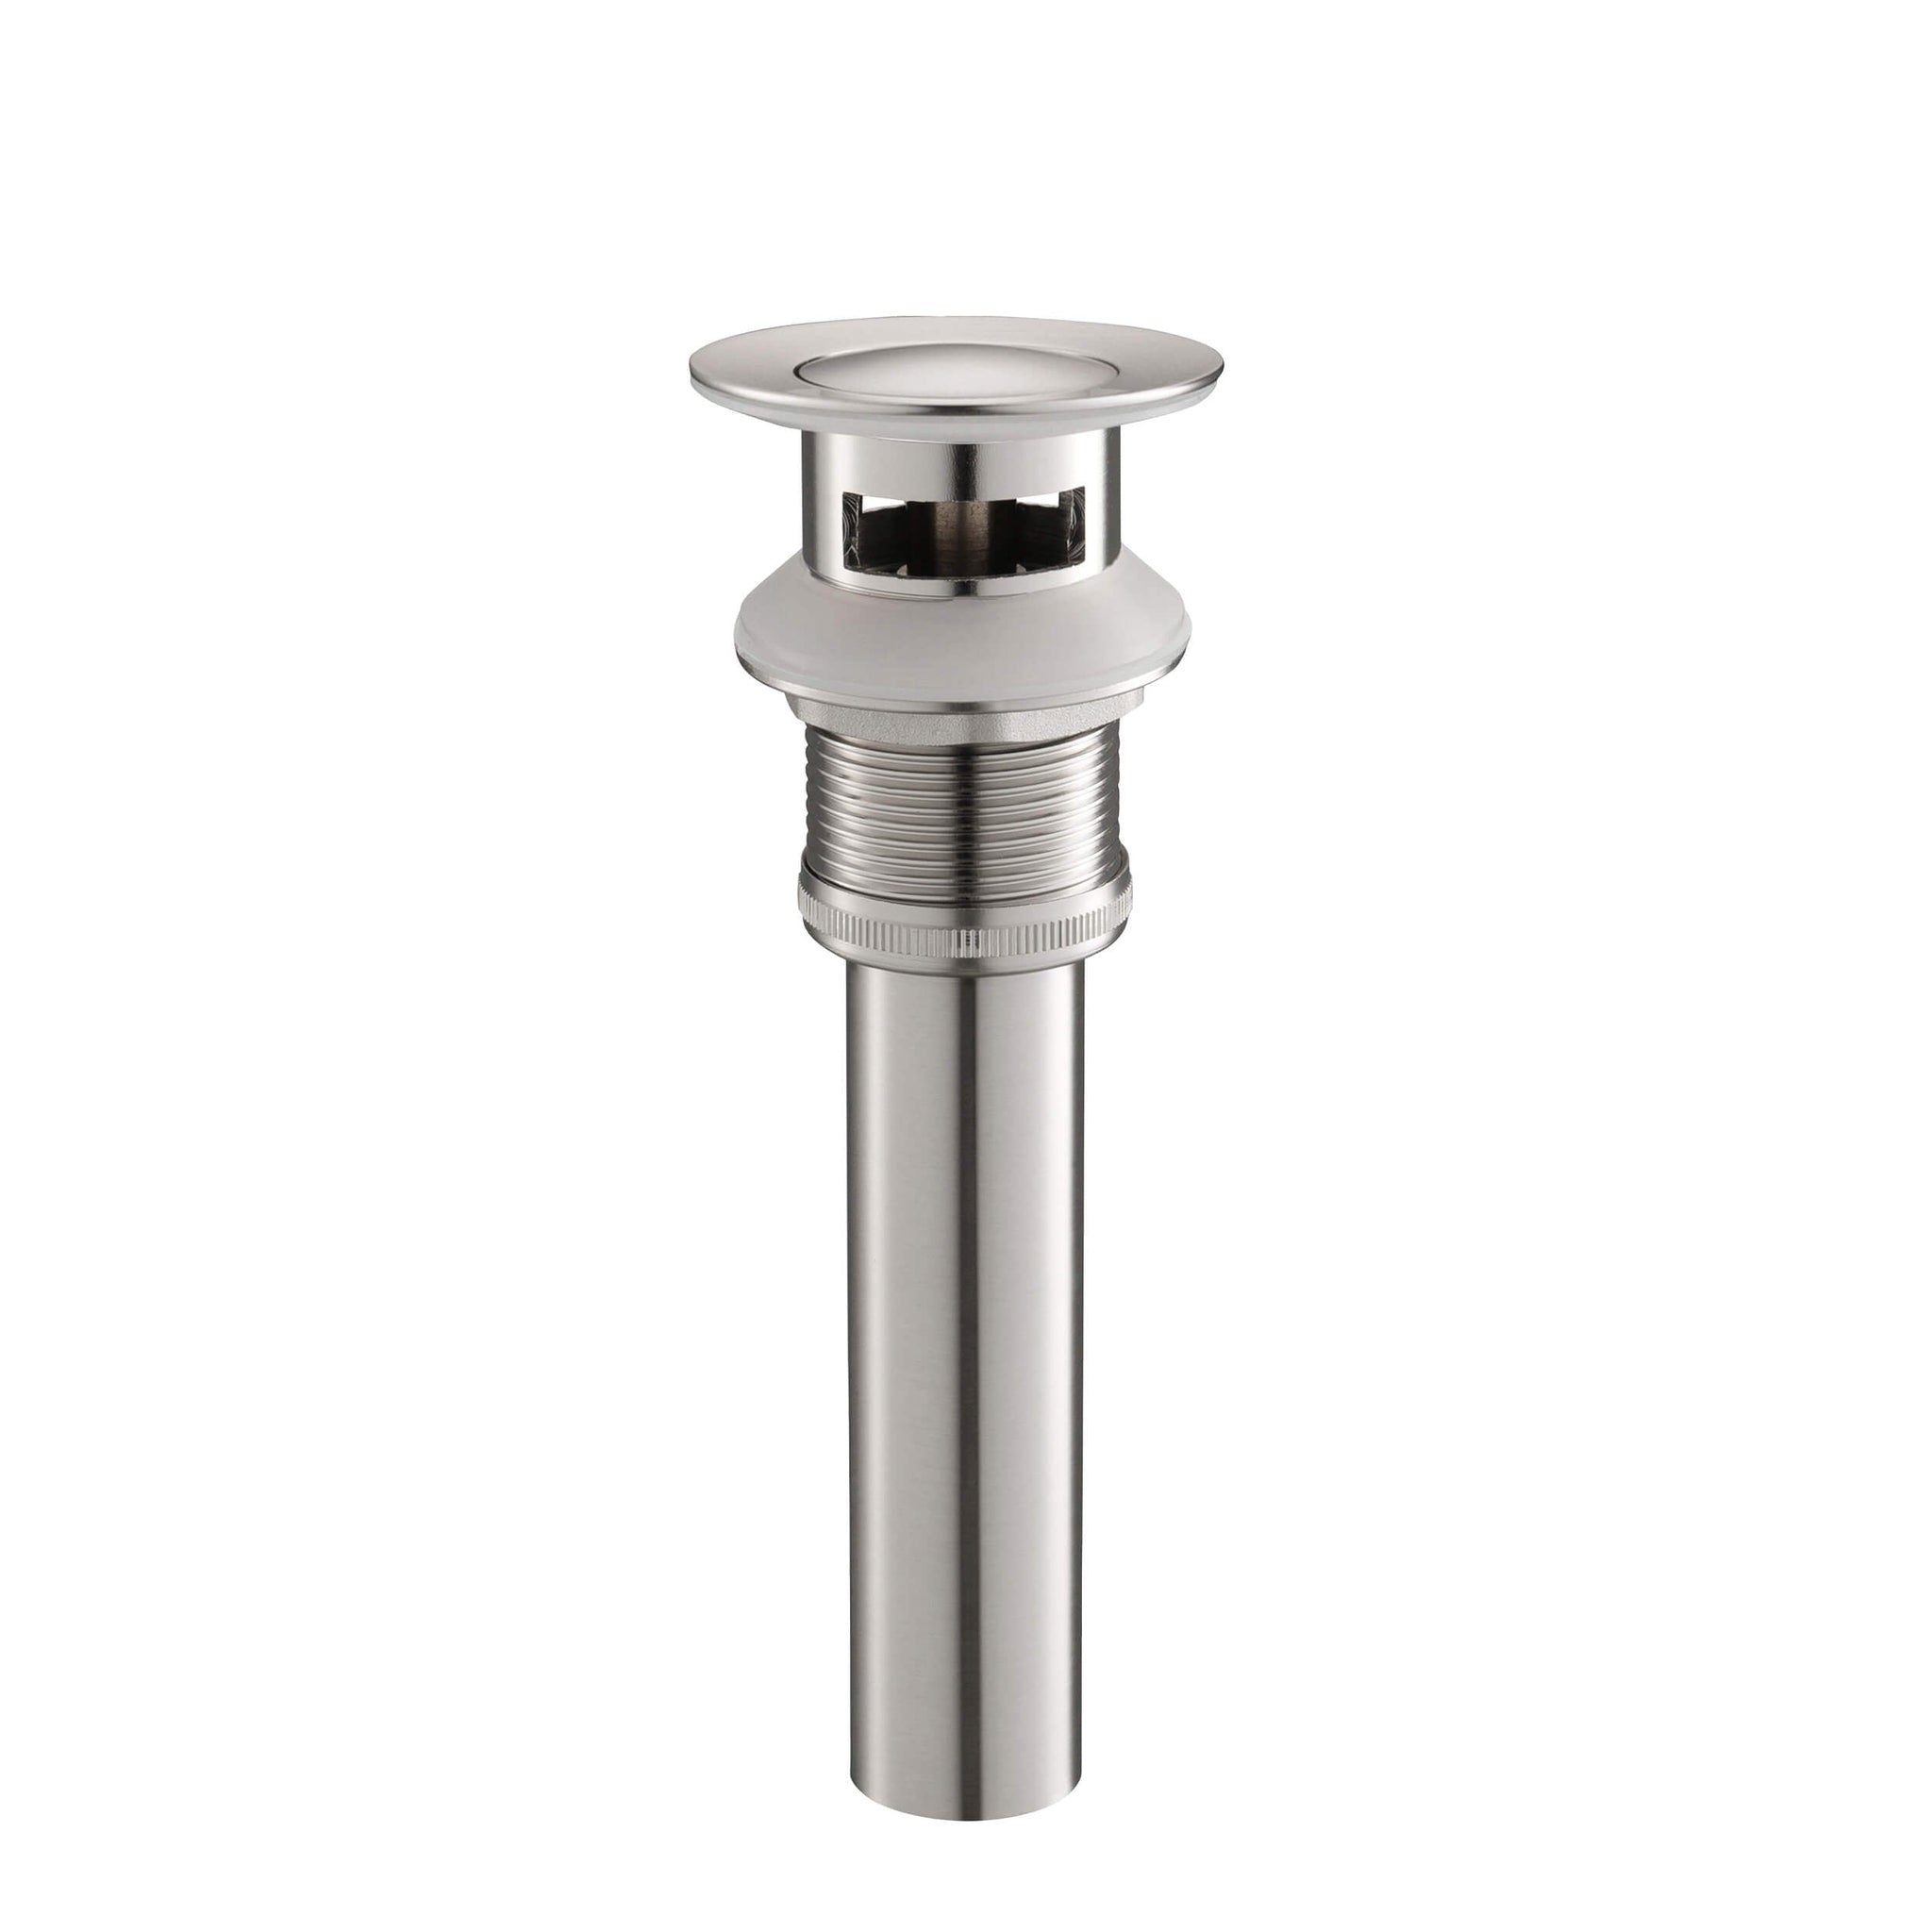 KIBI, KIBI Brass Bathroom Sink Pop-Up Drain Stopper Small Cover With Overflow in Brushed Nickel Finish